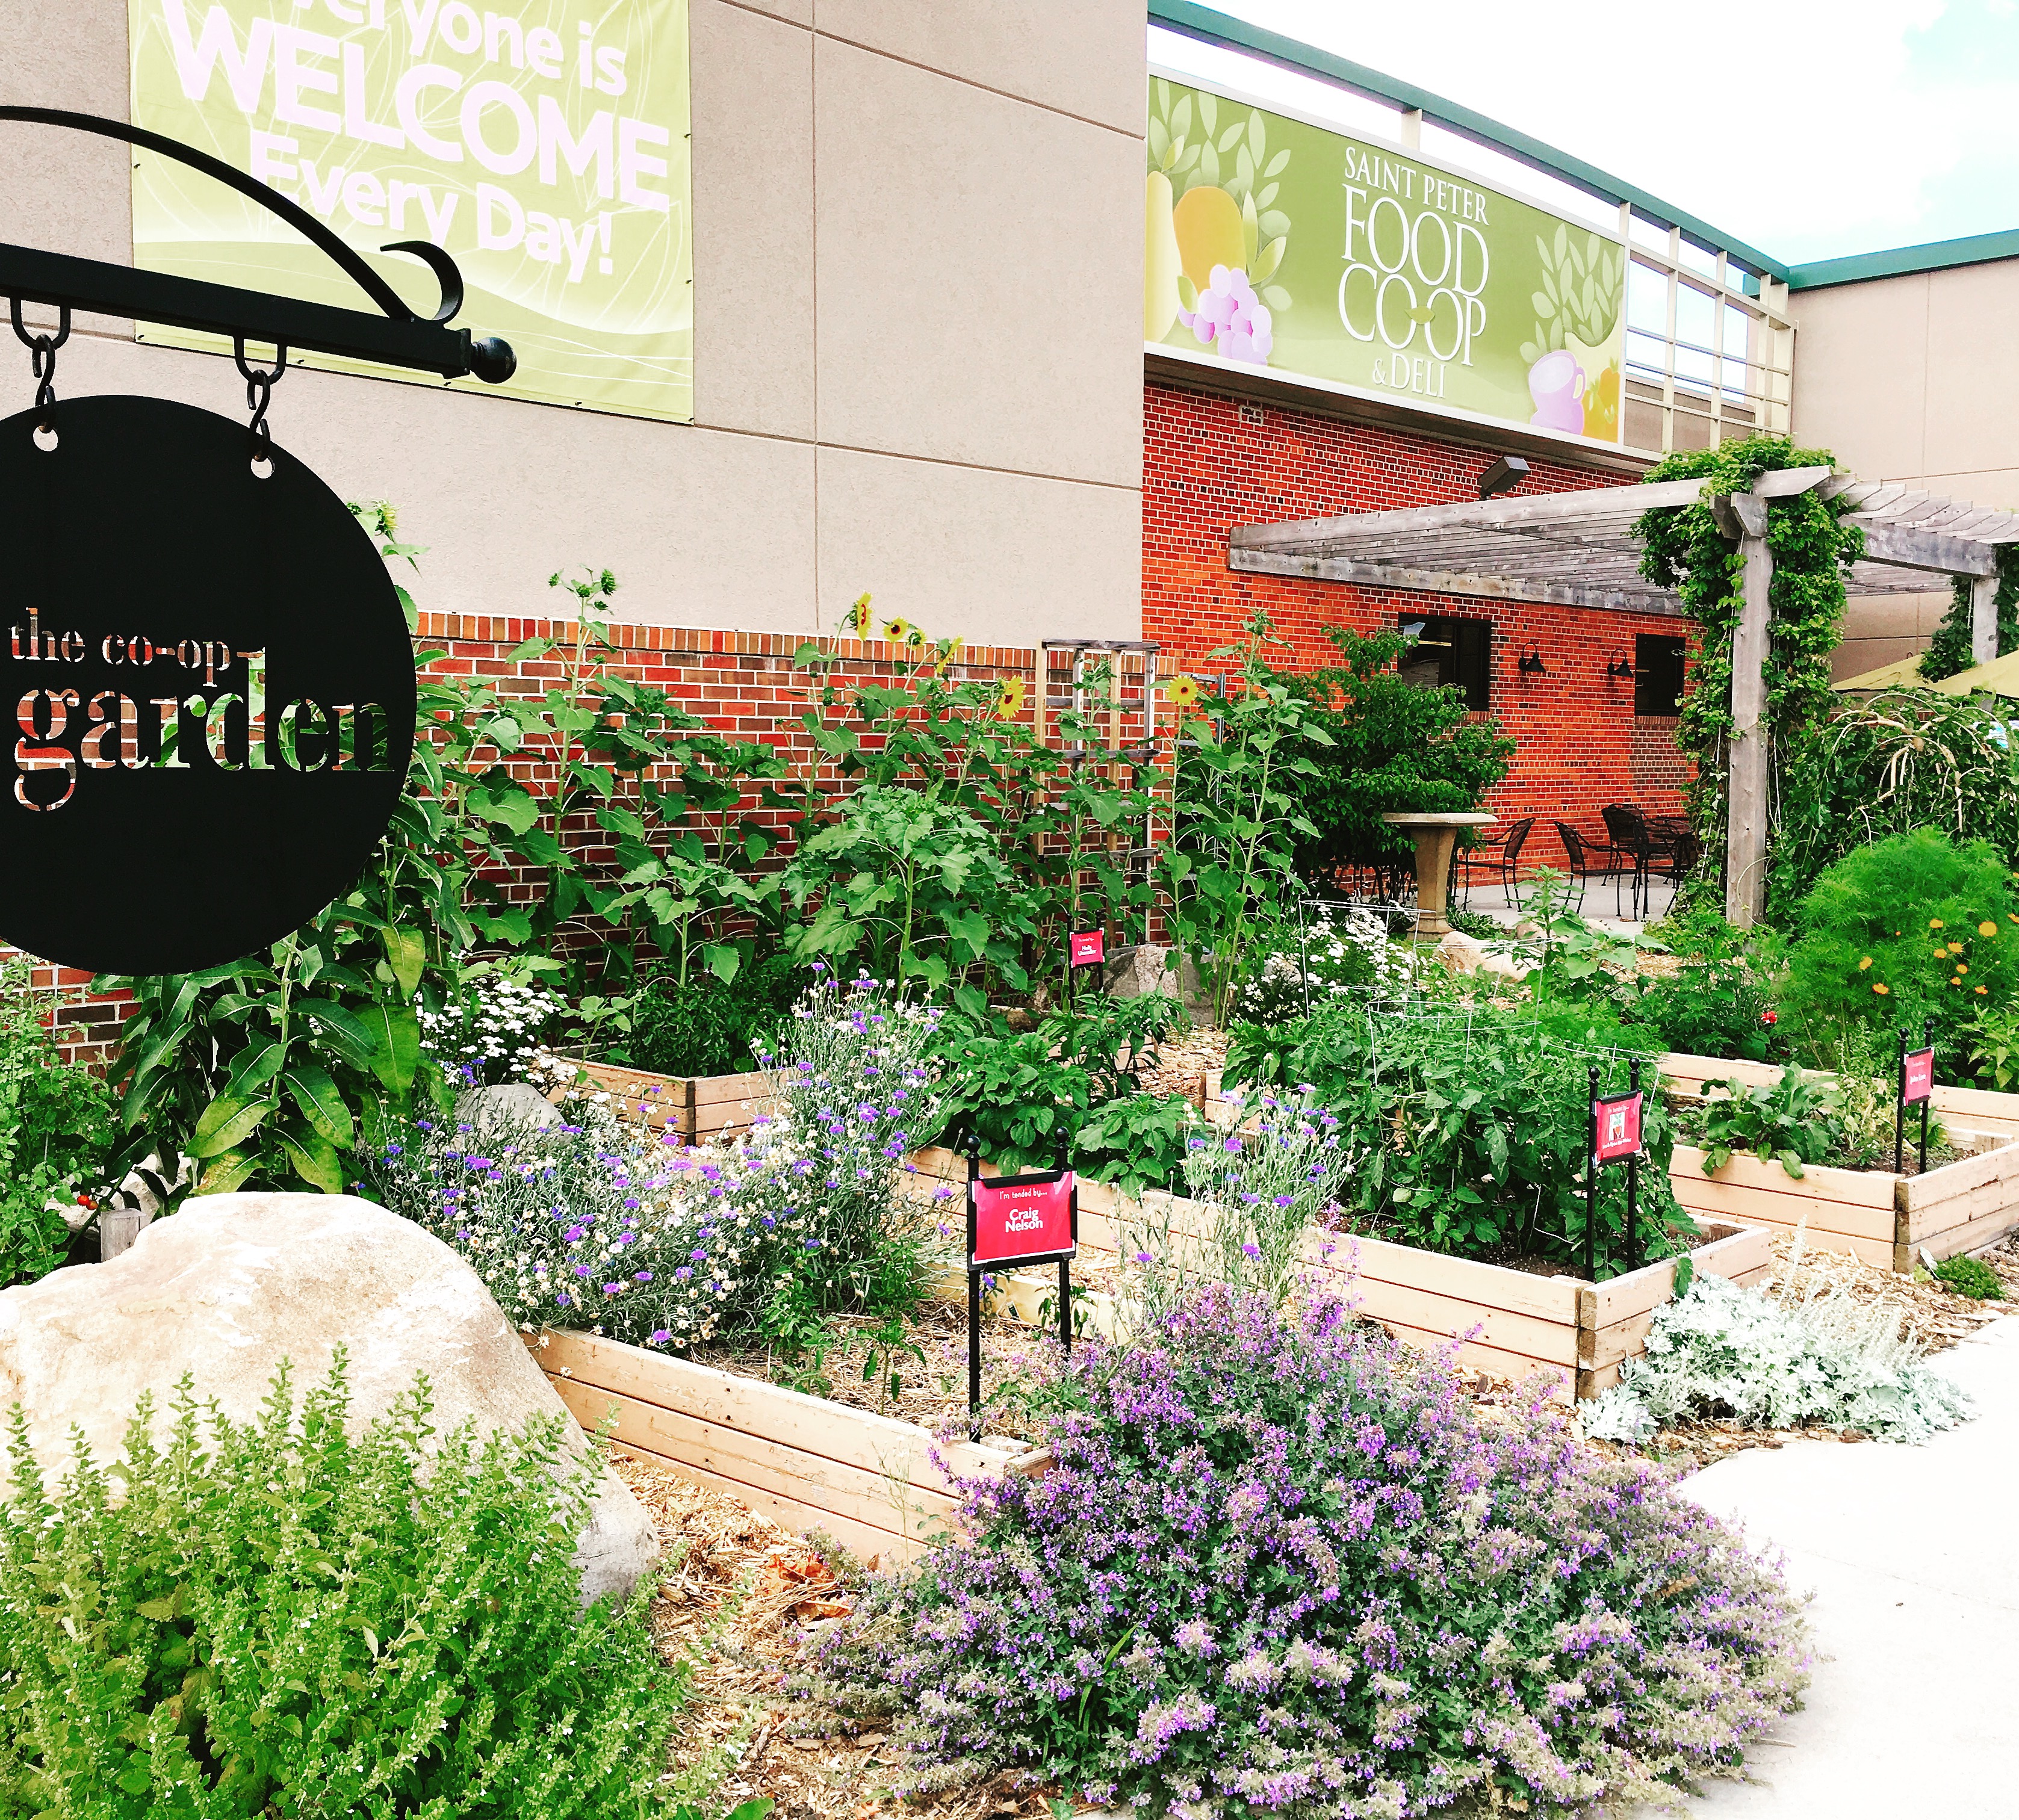 a photo of the St. Peter Food Co-op garden